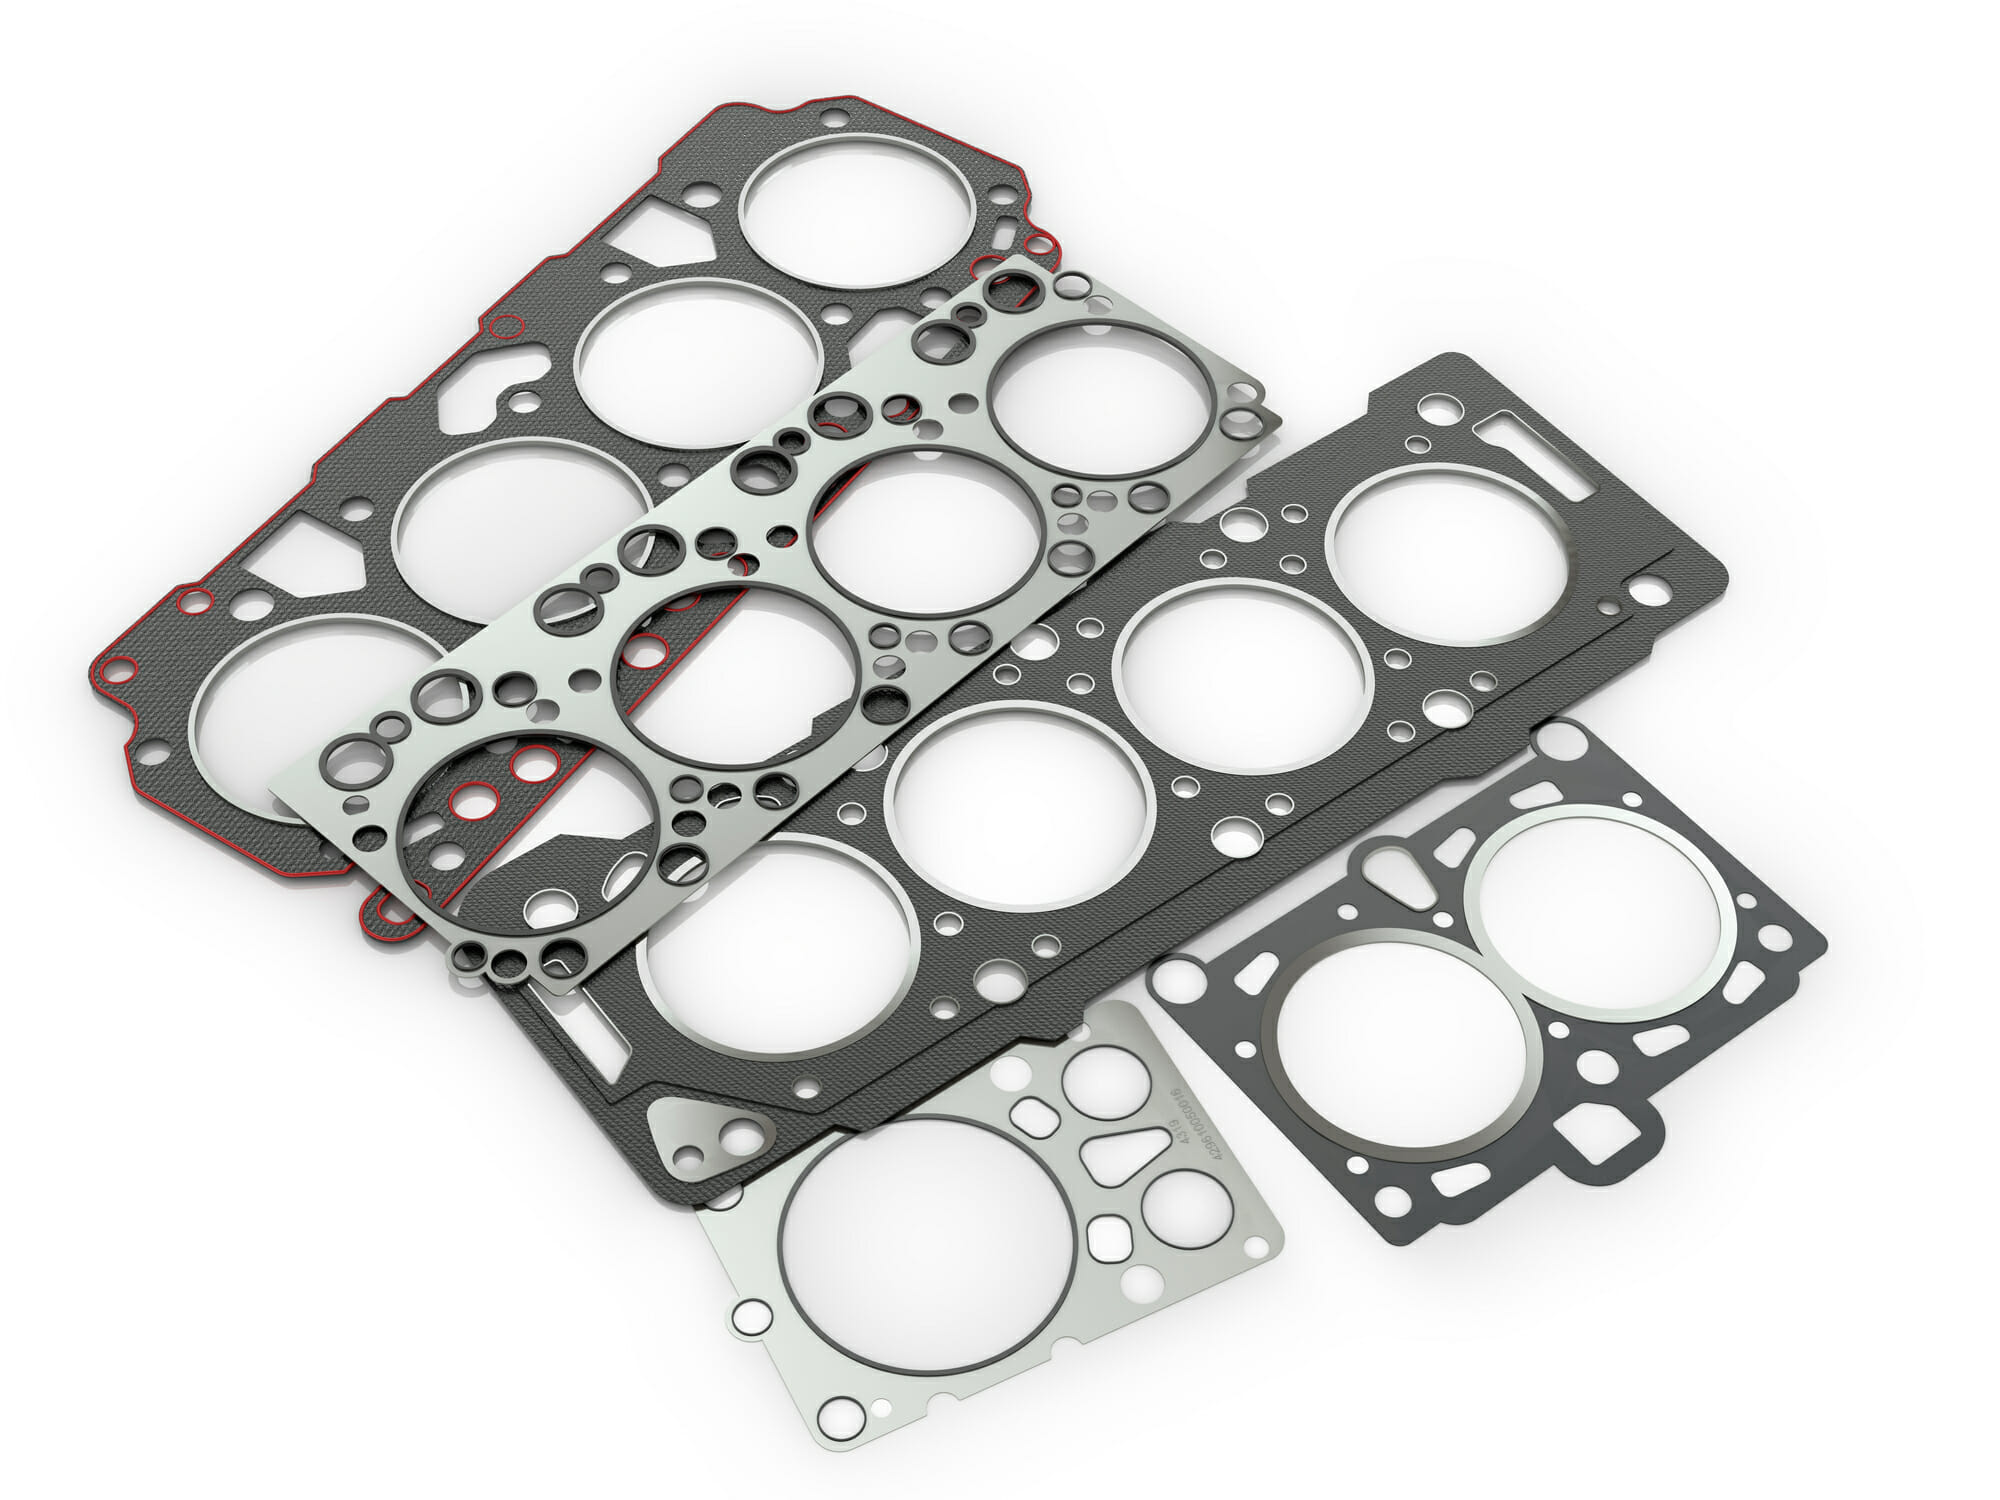 Gaskets for cylinder car engine isolated white background.